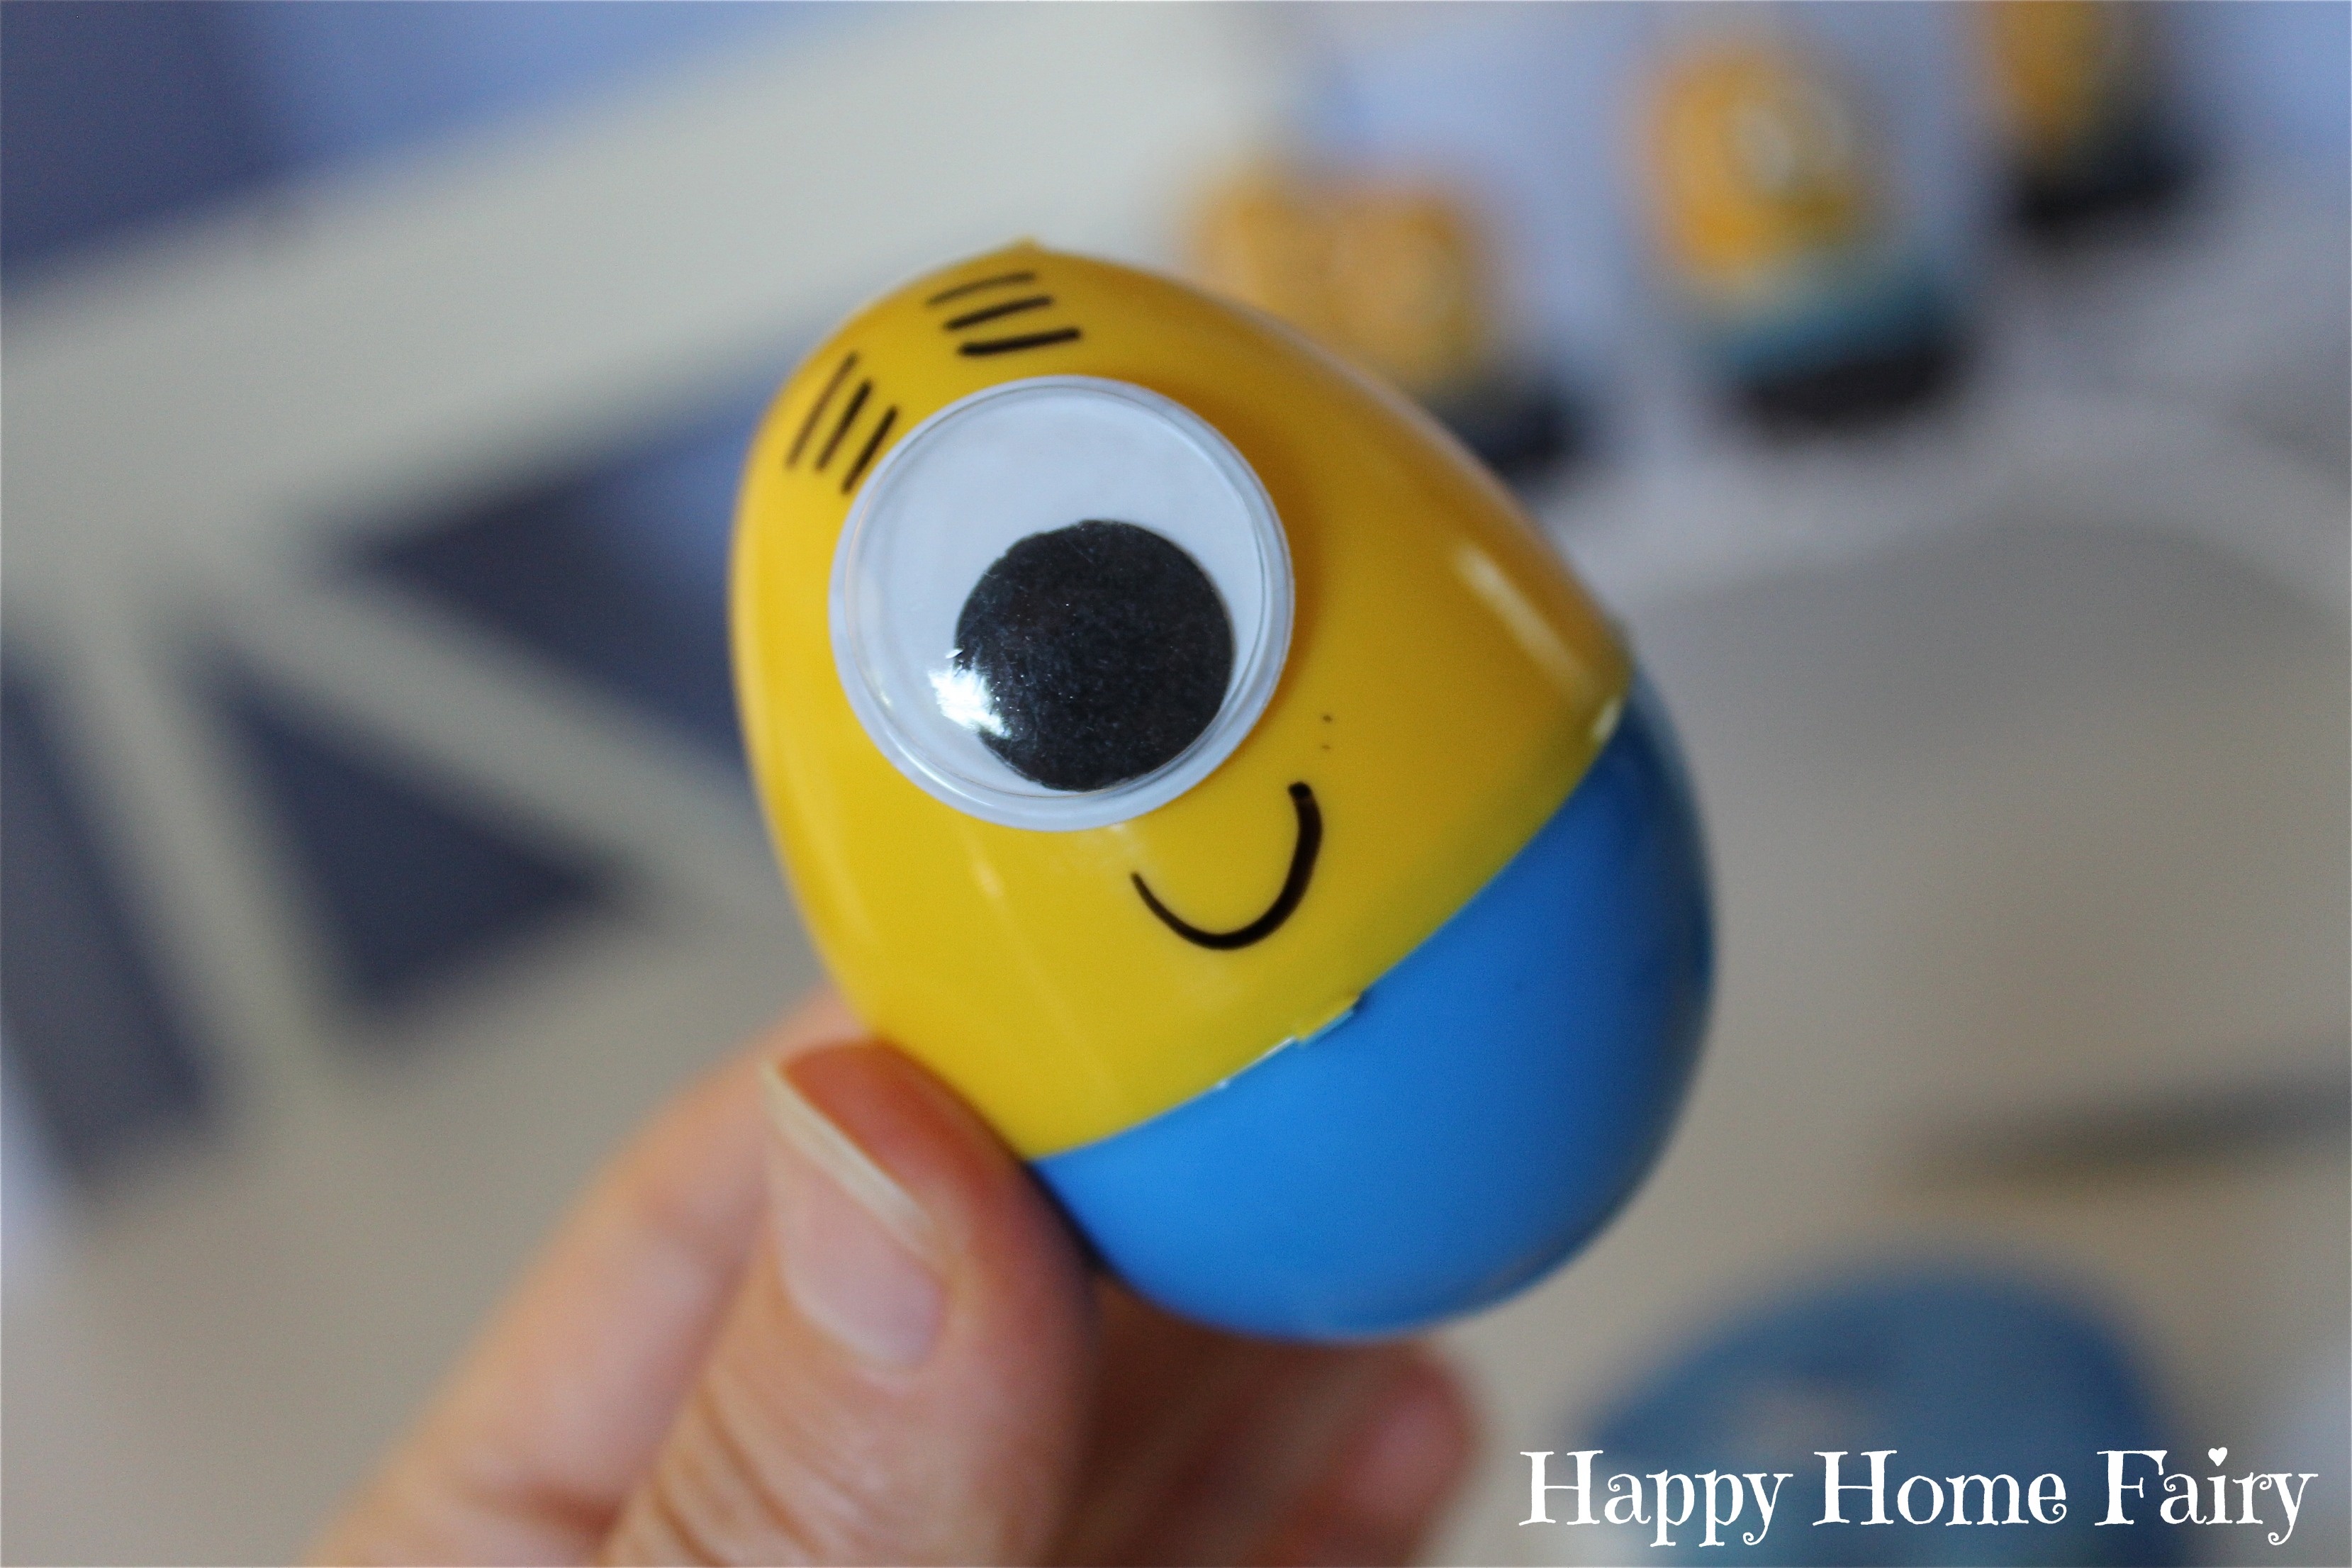 How To Make Minion Easter Eggs - Happy Home Fairy